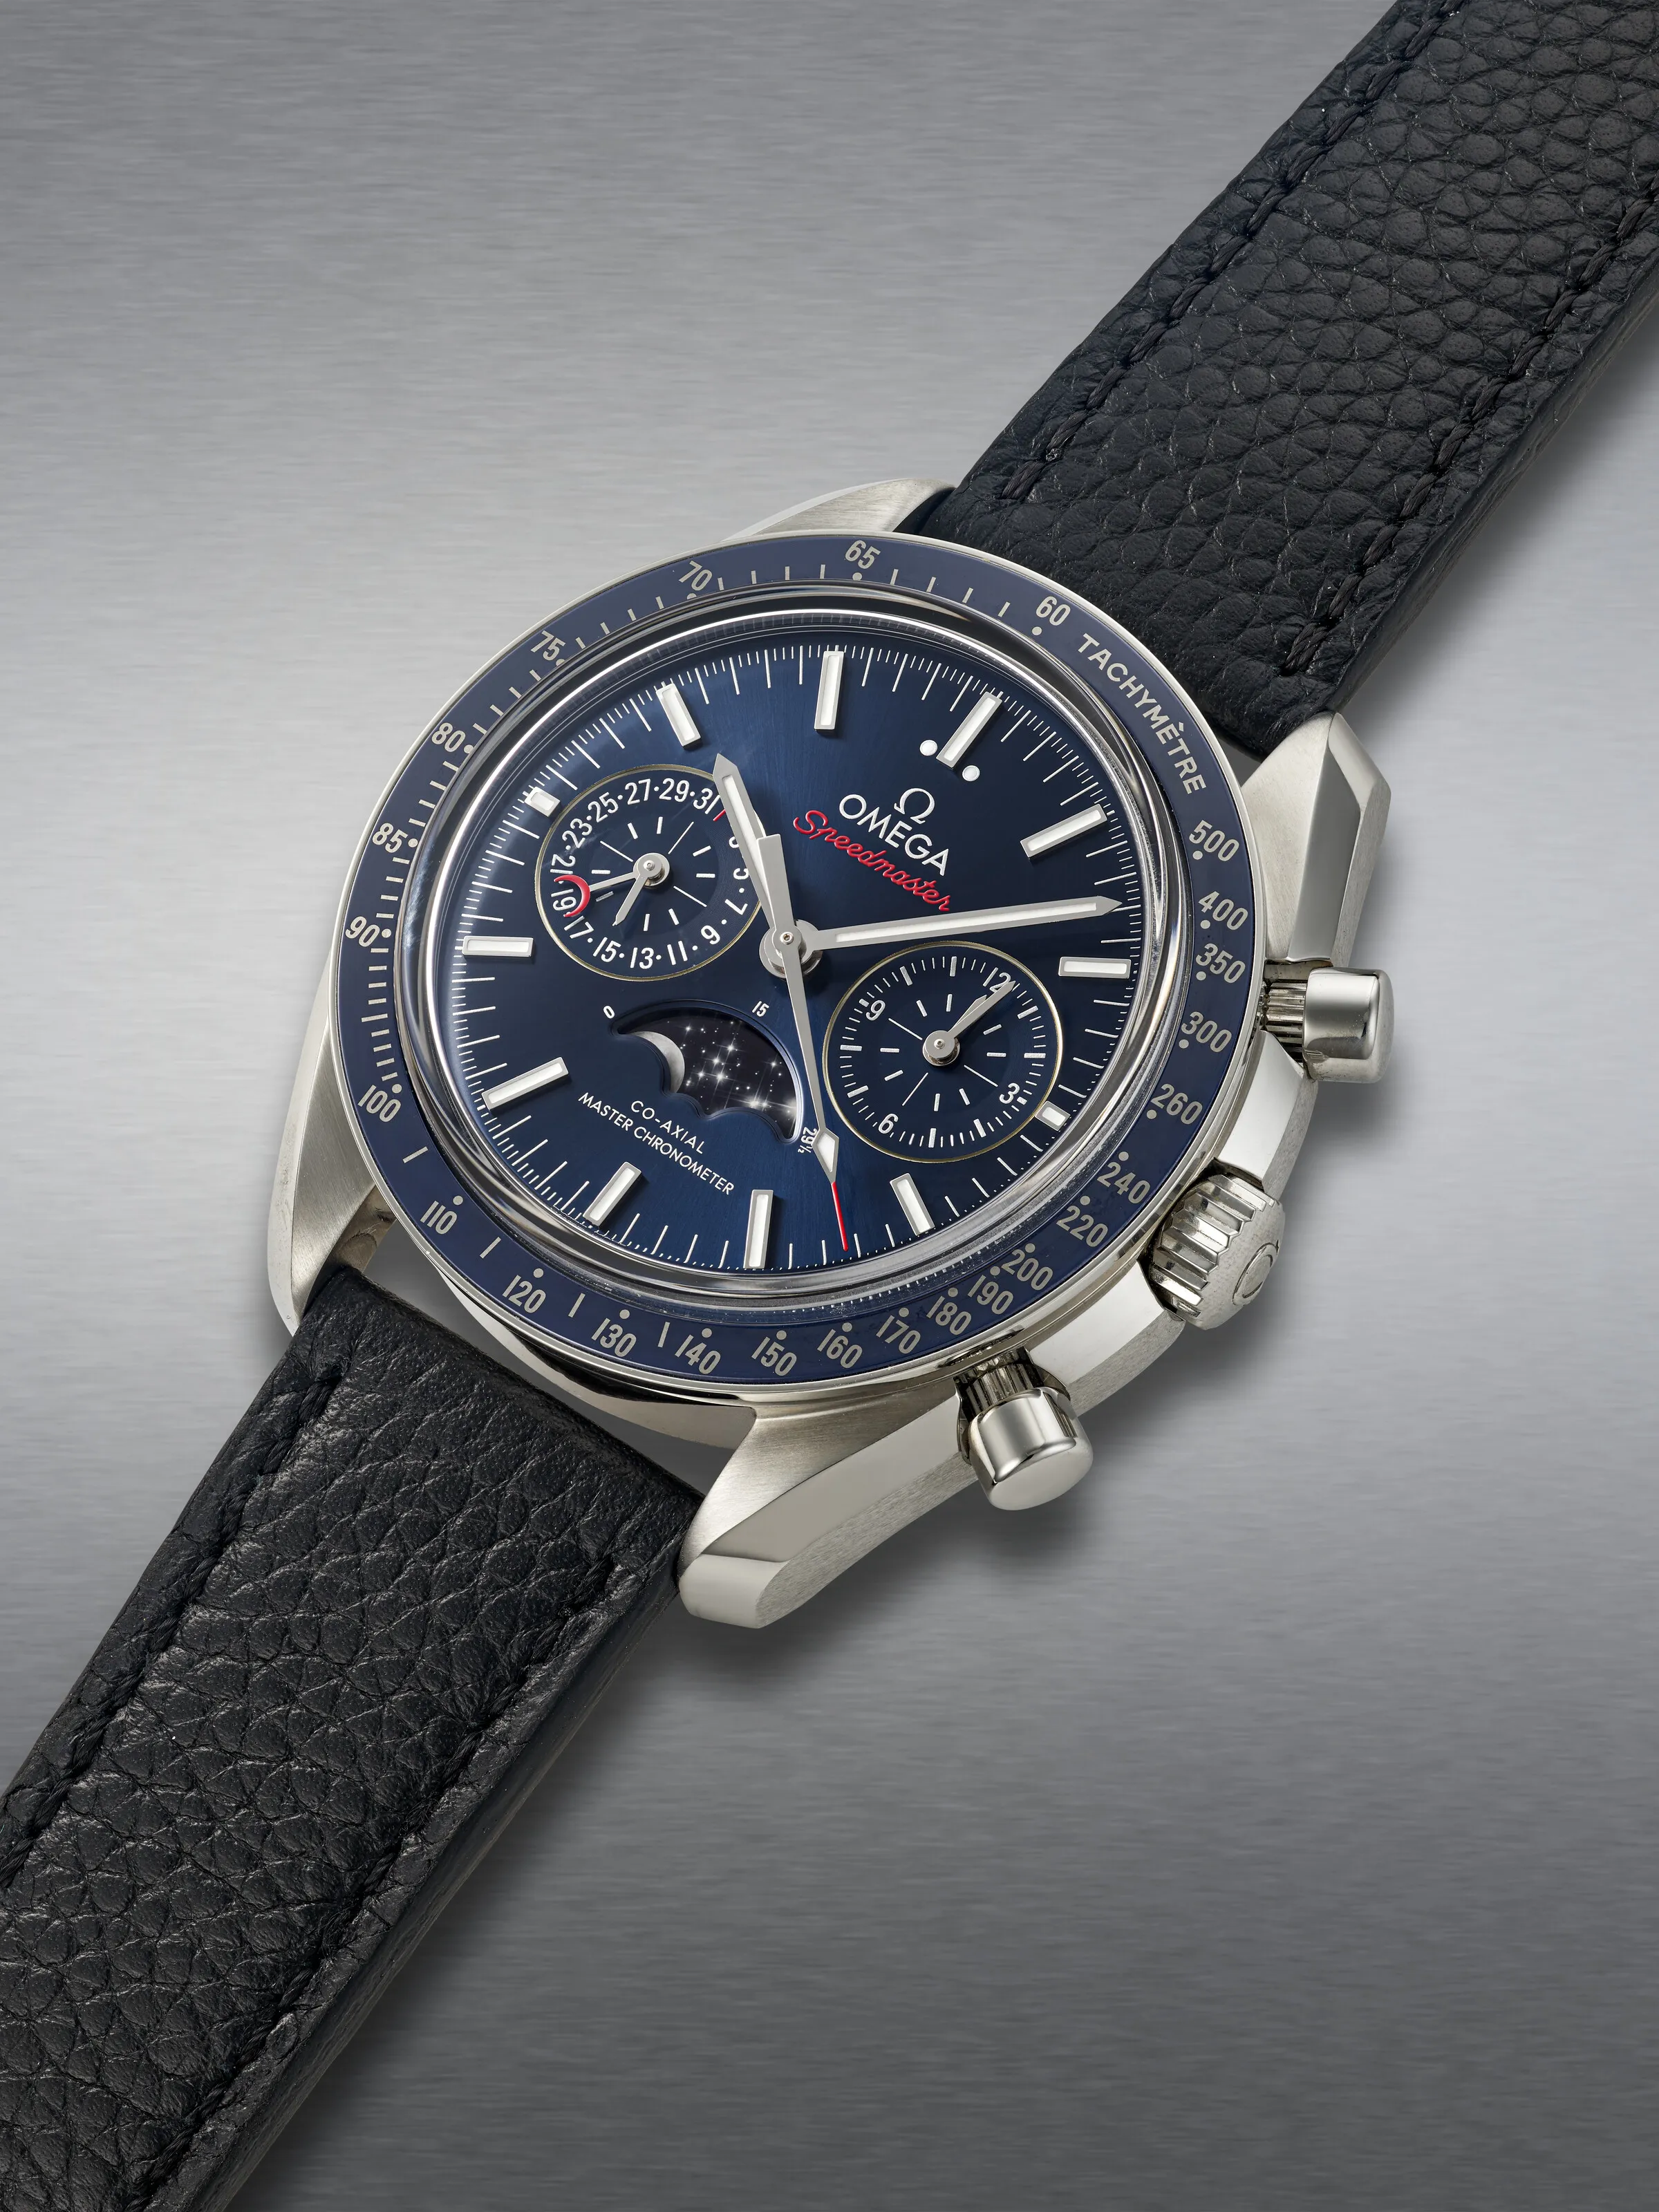 Omega Speedmaster Professional Moonwatch Moonphase 304.33.44.52.03.001 44.5mm Stainless steel Blue 1